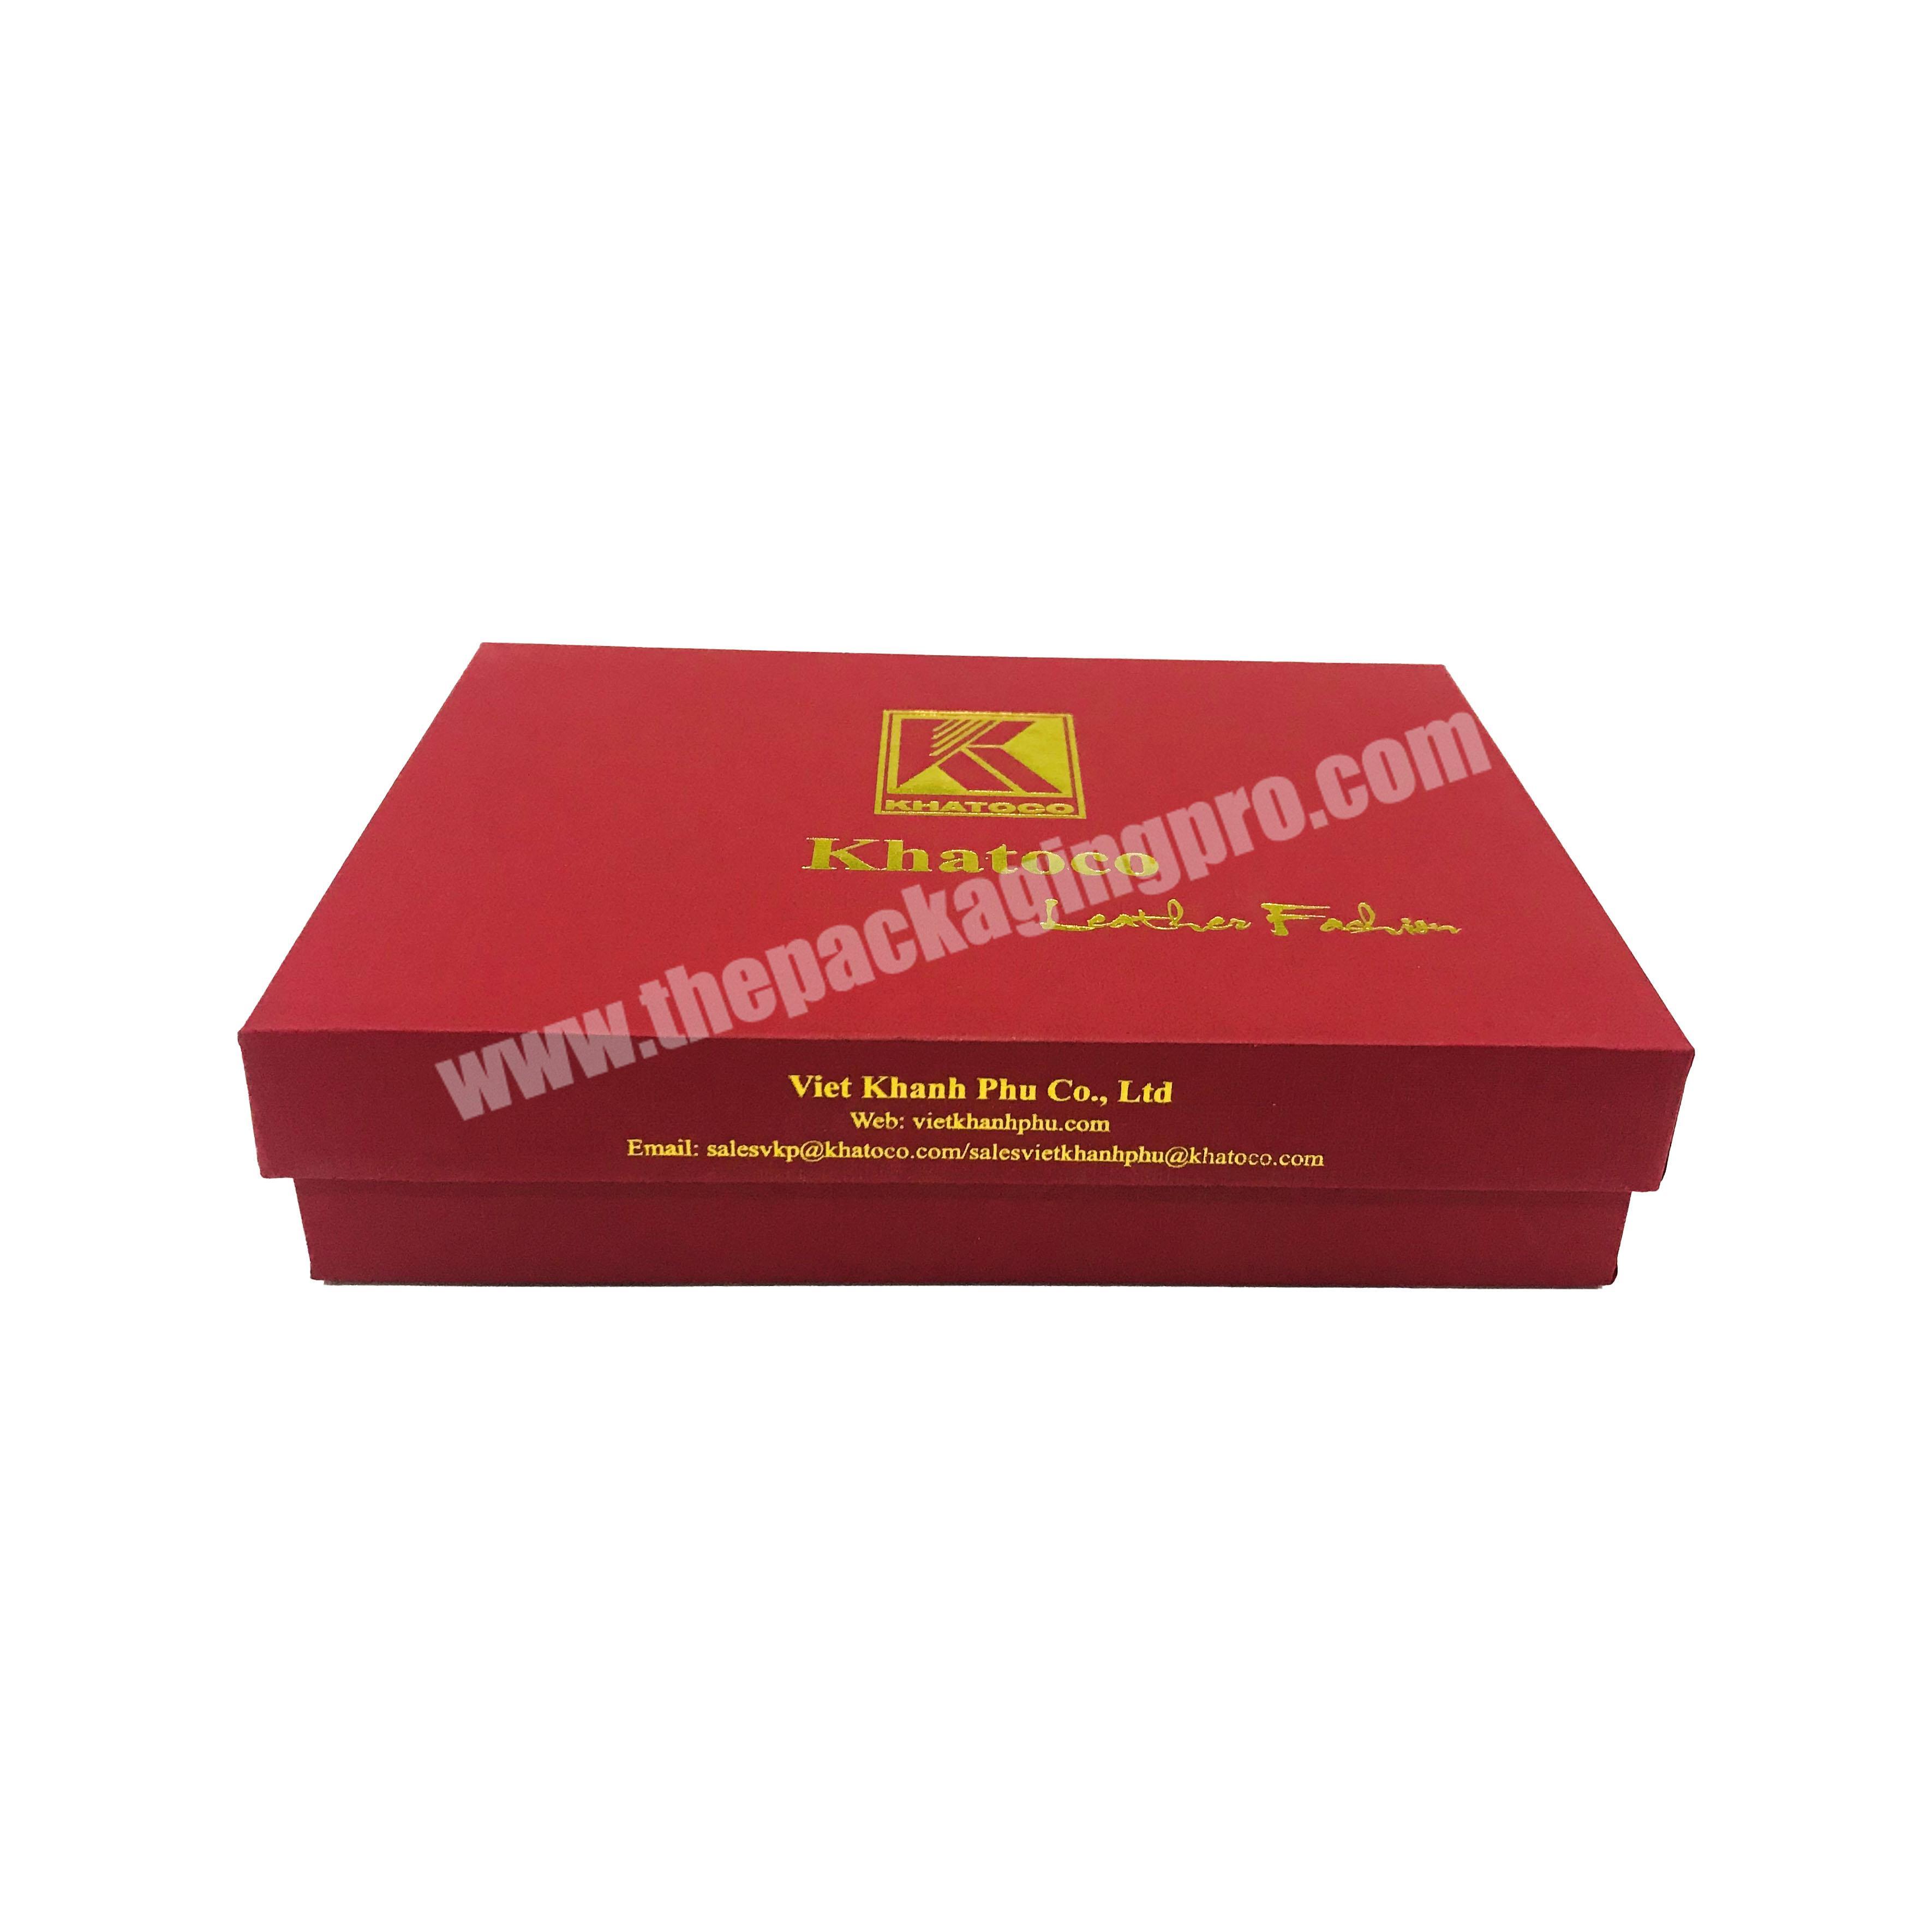 high-quality-red-boxes-cardboard-with-lid-and-logo